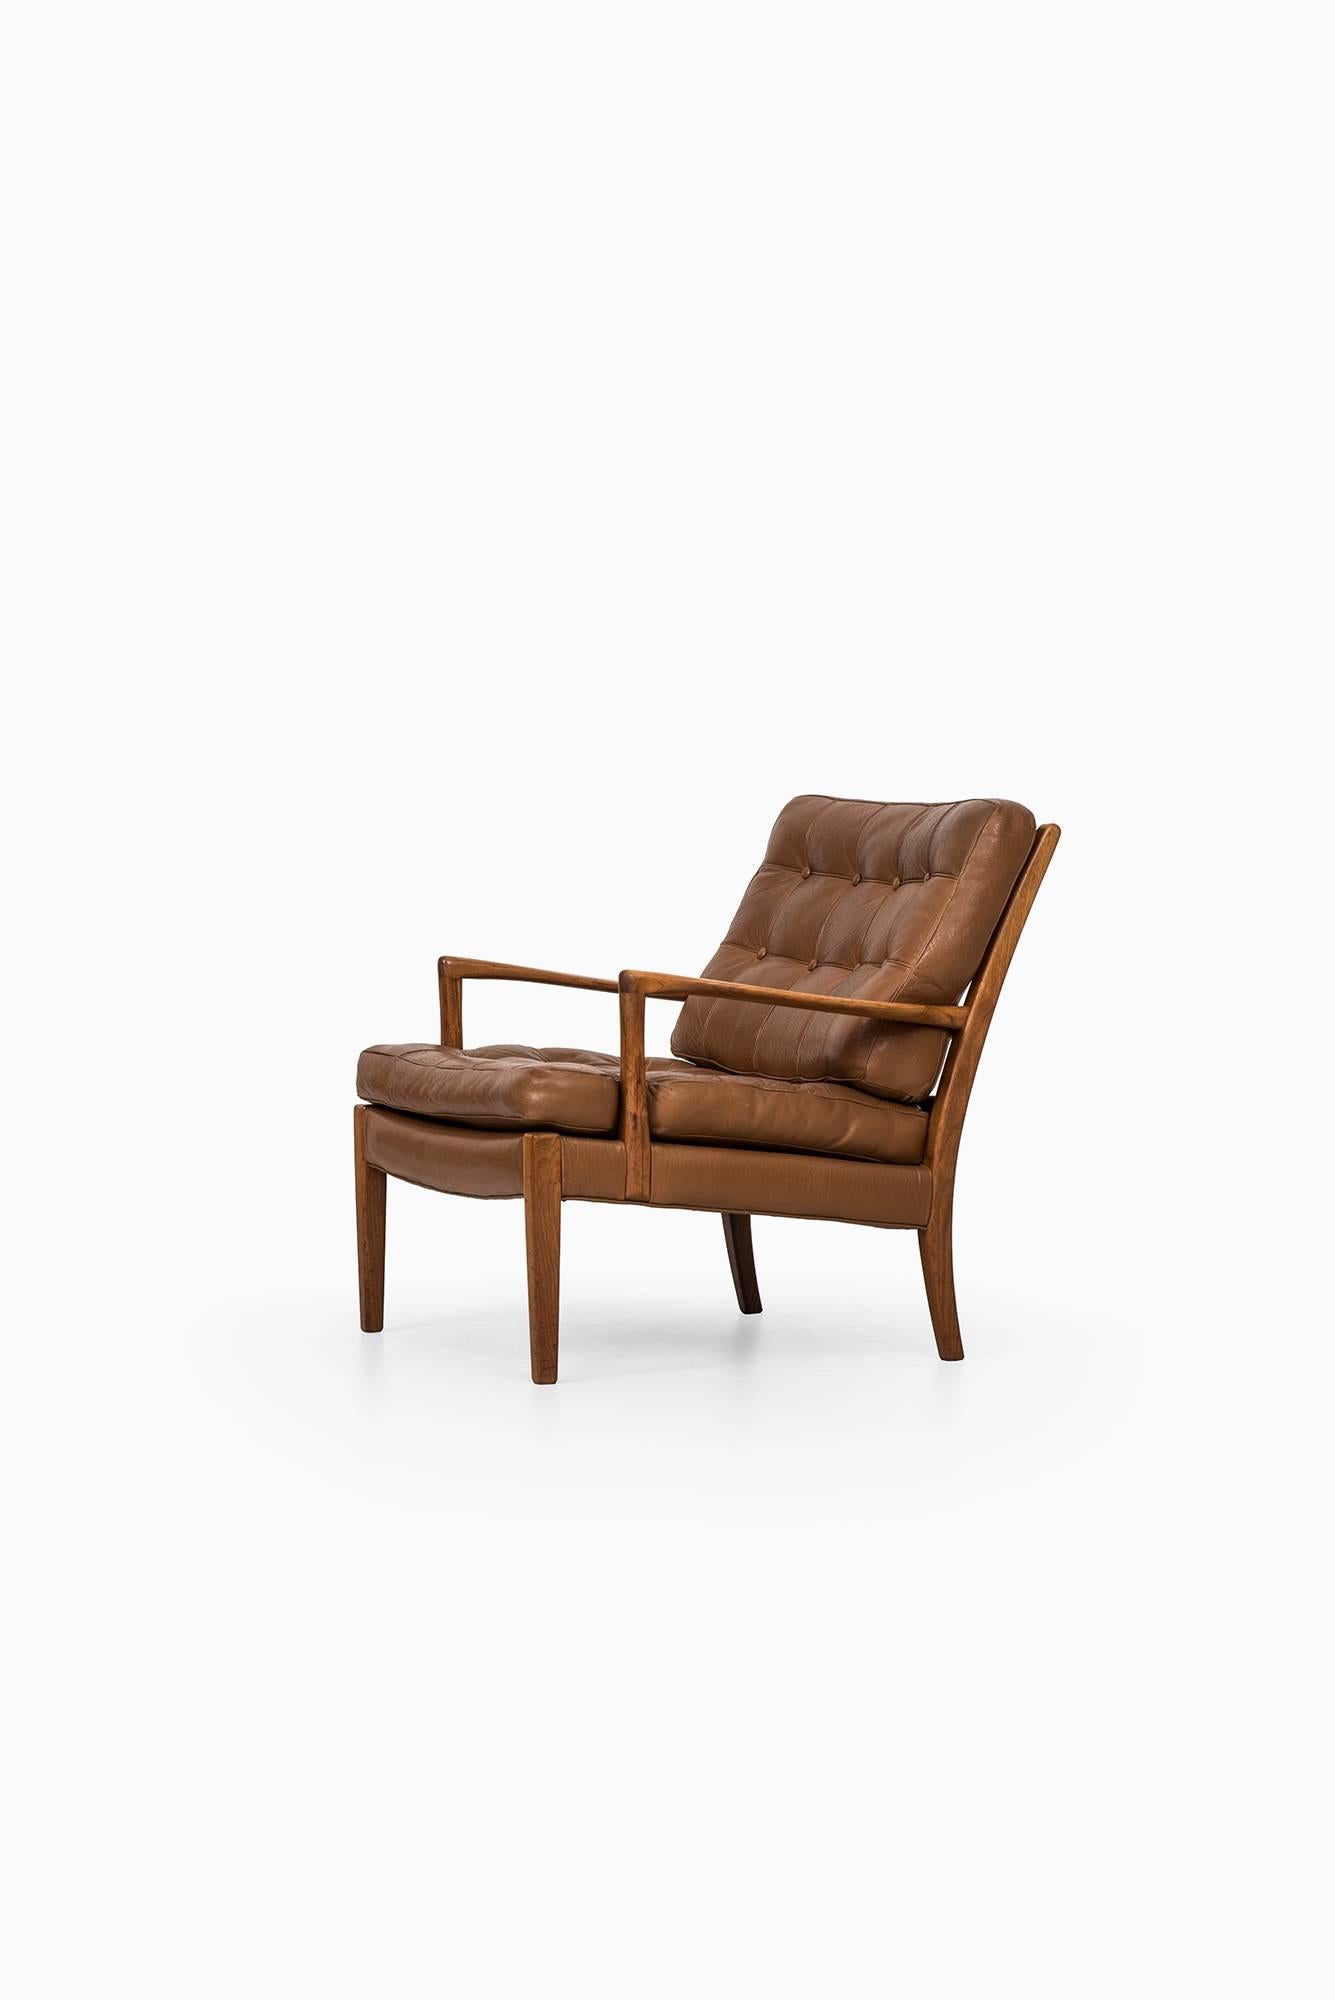 Mid-20th Century Arne Norell Easy Chair Model Löven by Arne Norell AB in Sweden